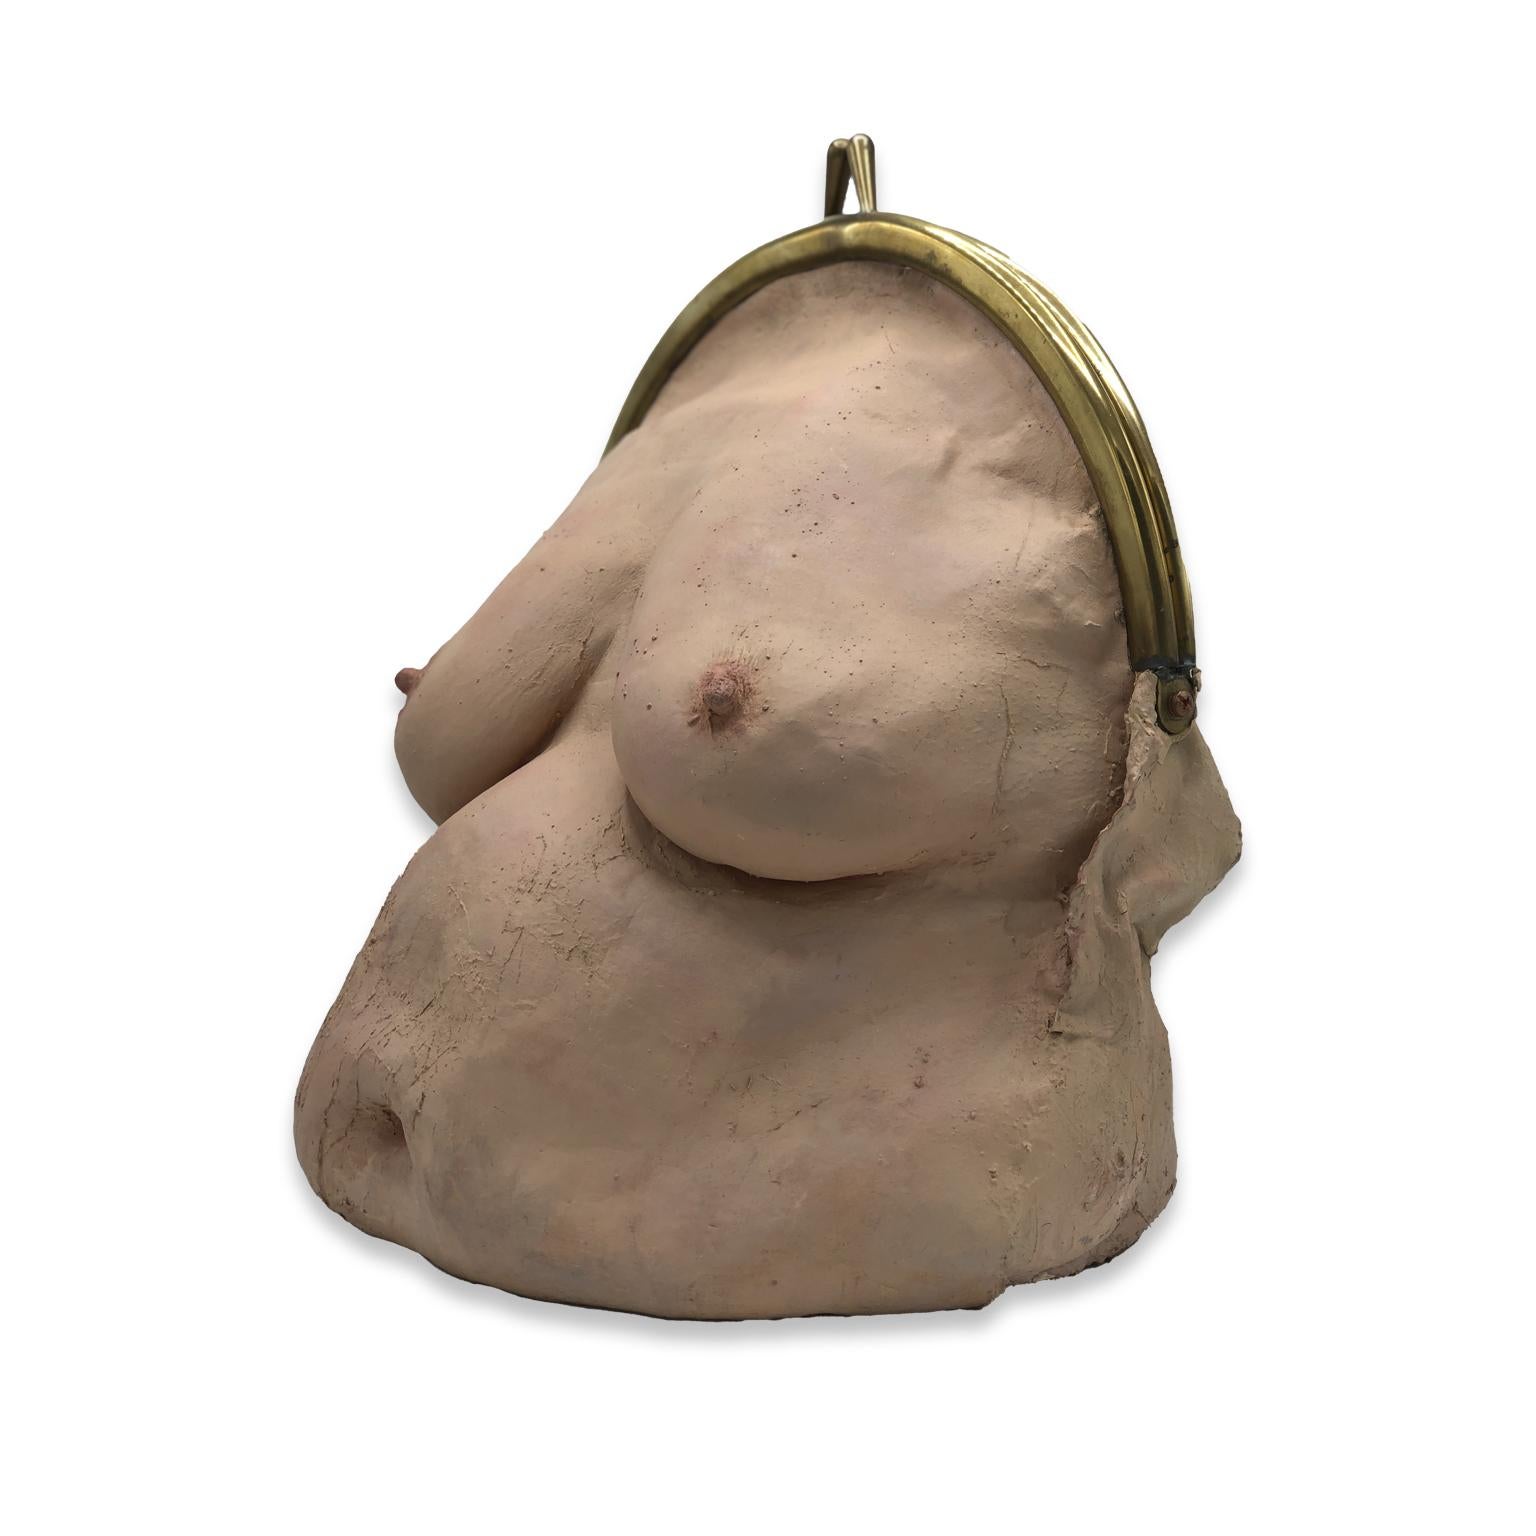 Nude Female Figurative Latex Contemporary Object - Breast Bag IV - Surrealist Sculpture by Miriam Meulepas